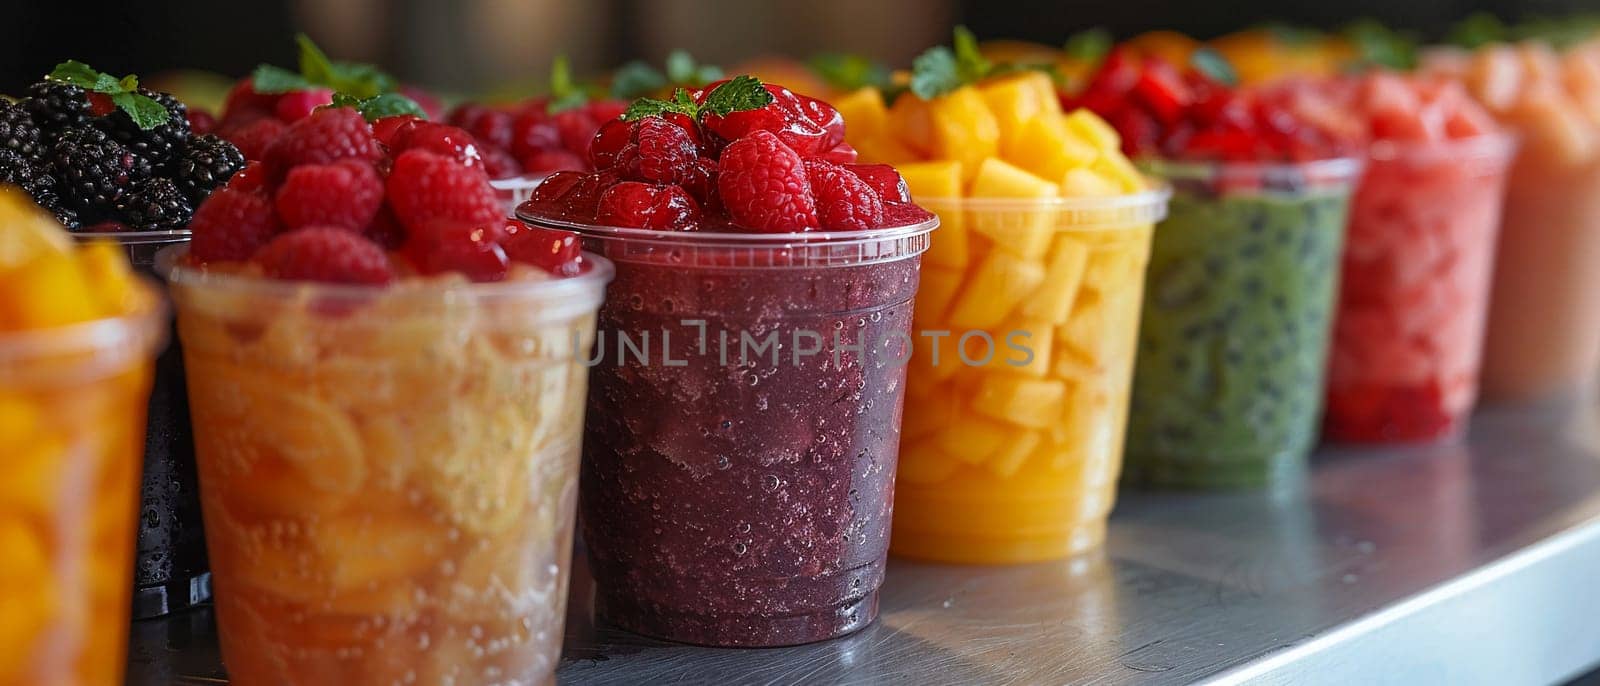 Smoothie Bar Blends Wellness in Business of Nutritious Refreshments, Smoothie menus and fruit toppings blend a story of wellness and nutritious refreshments in the smoothie bar business.